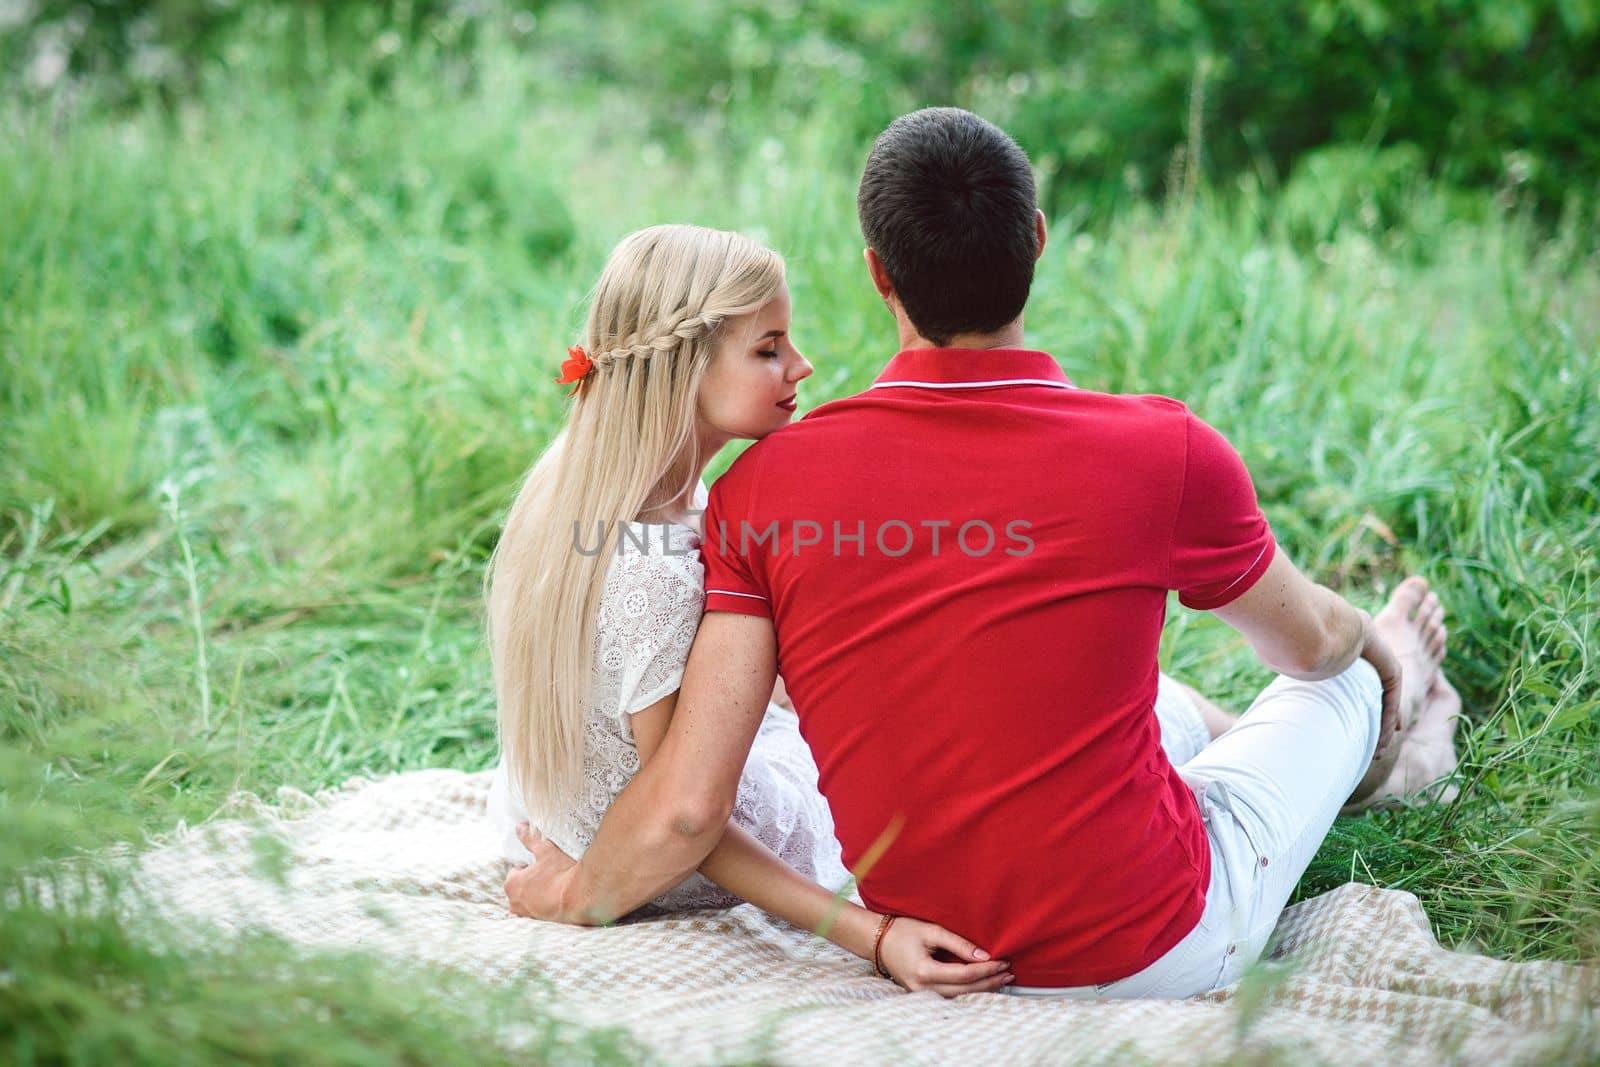 couple in love at a picnic in a park with green grass by Andreua